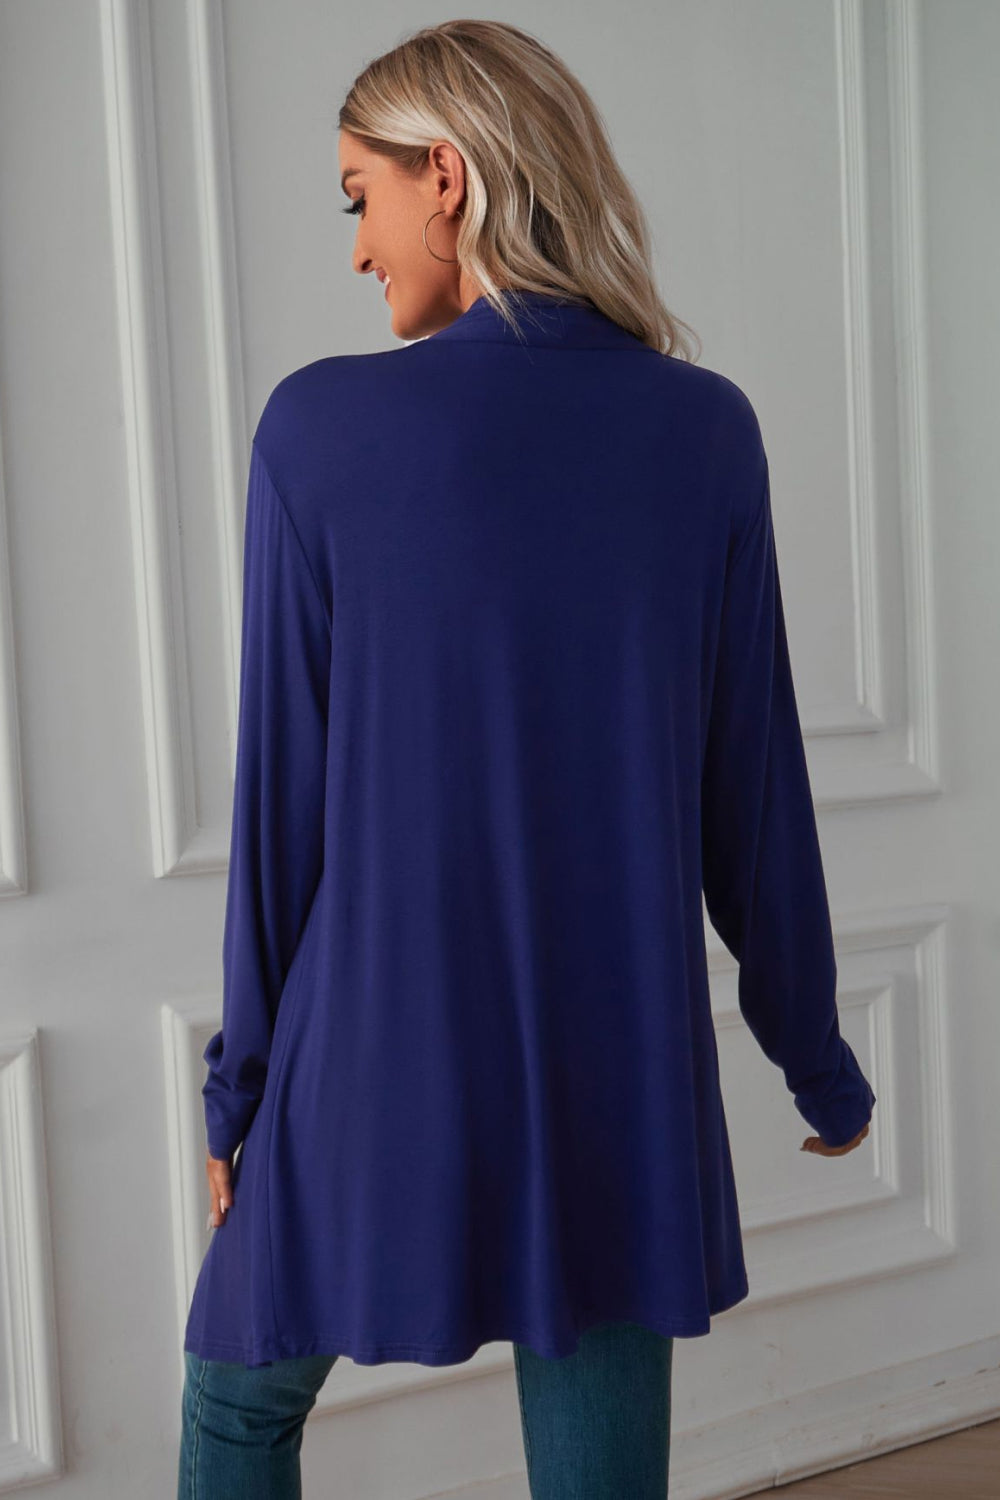 Open Front Long Sleeve Cardigan - Women’s Clothing & Accessories - Shirts & Tops - 2 - 2024